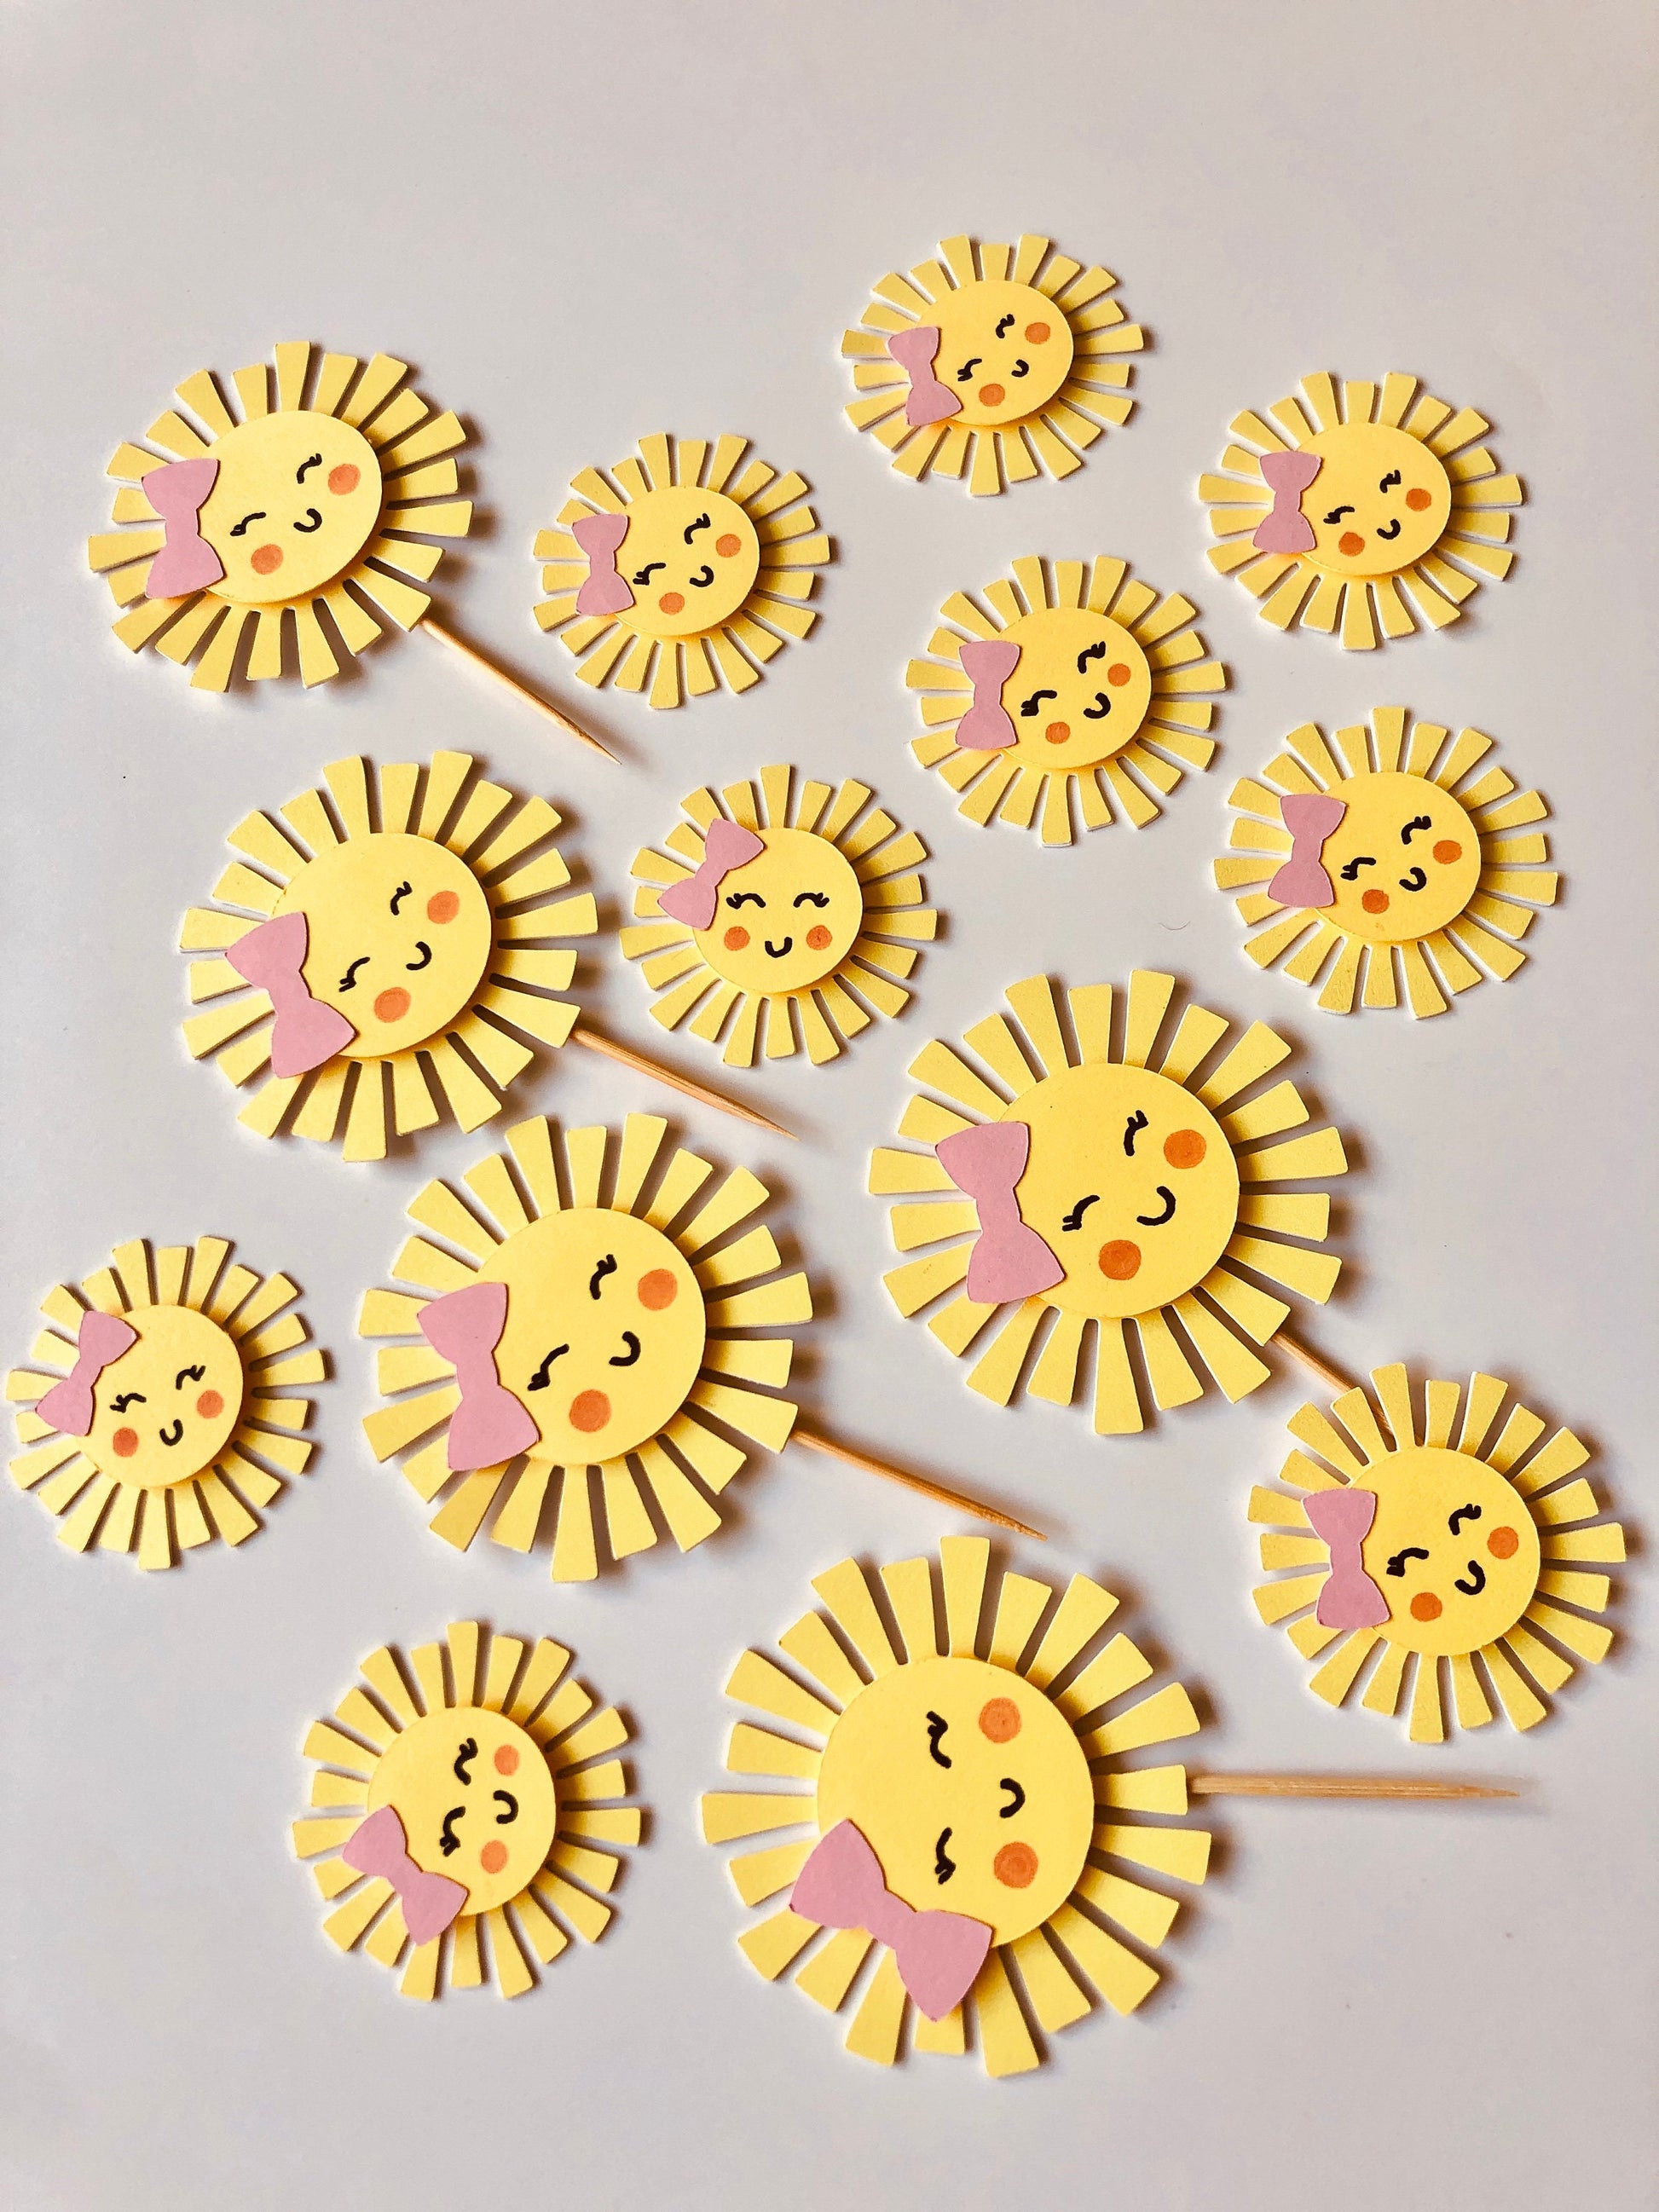 Sunshine cupcake toppers/ sunshine toppers/ sunshien party / sun cupcake topper / sunmy toppers/ little sunshine toppers/ sun birthday party